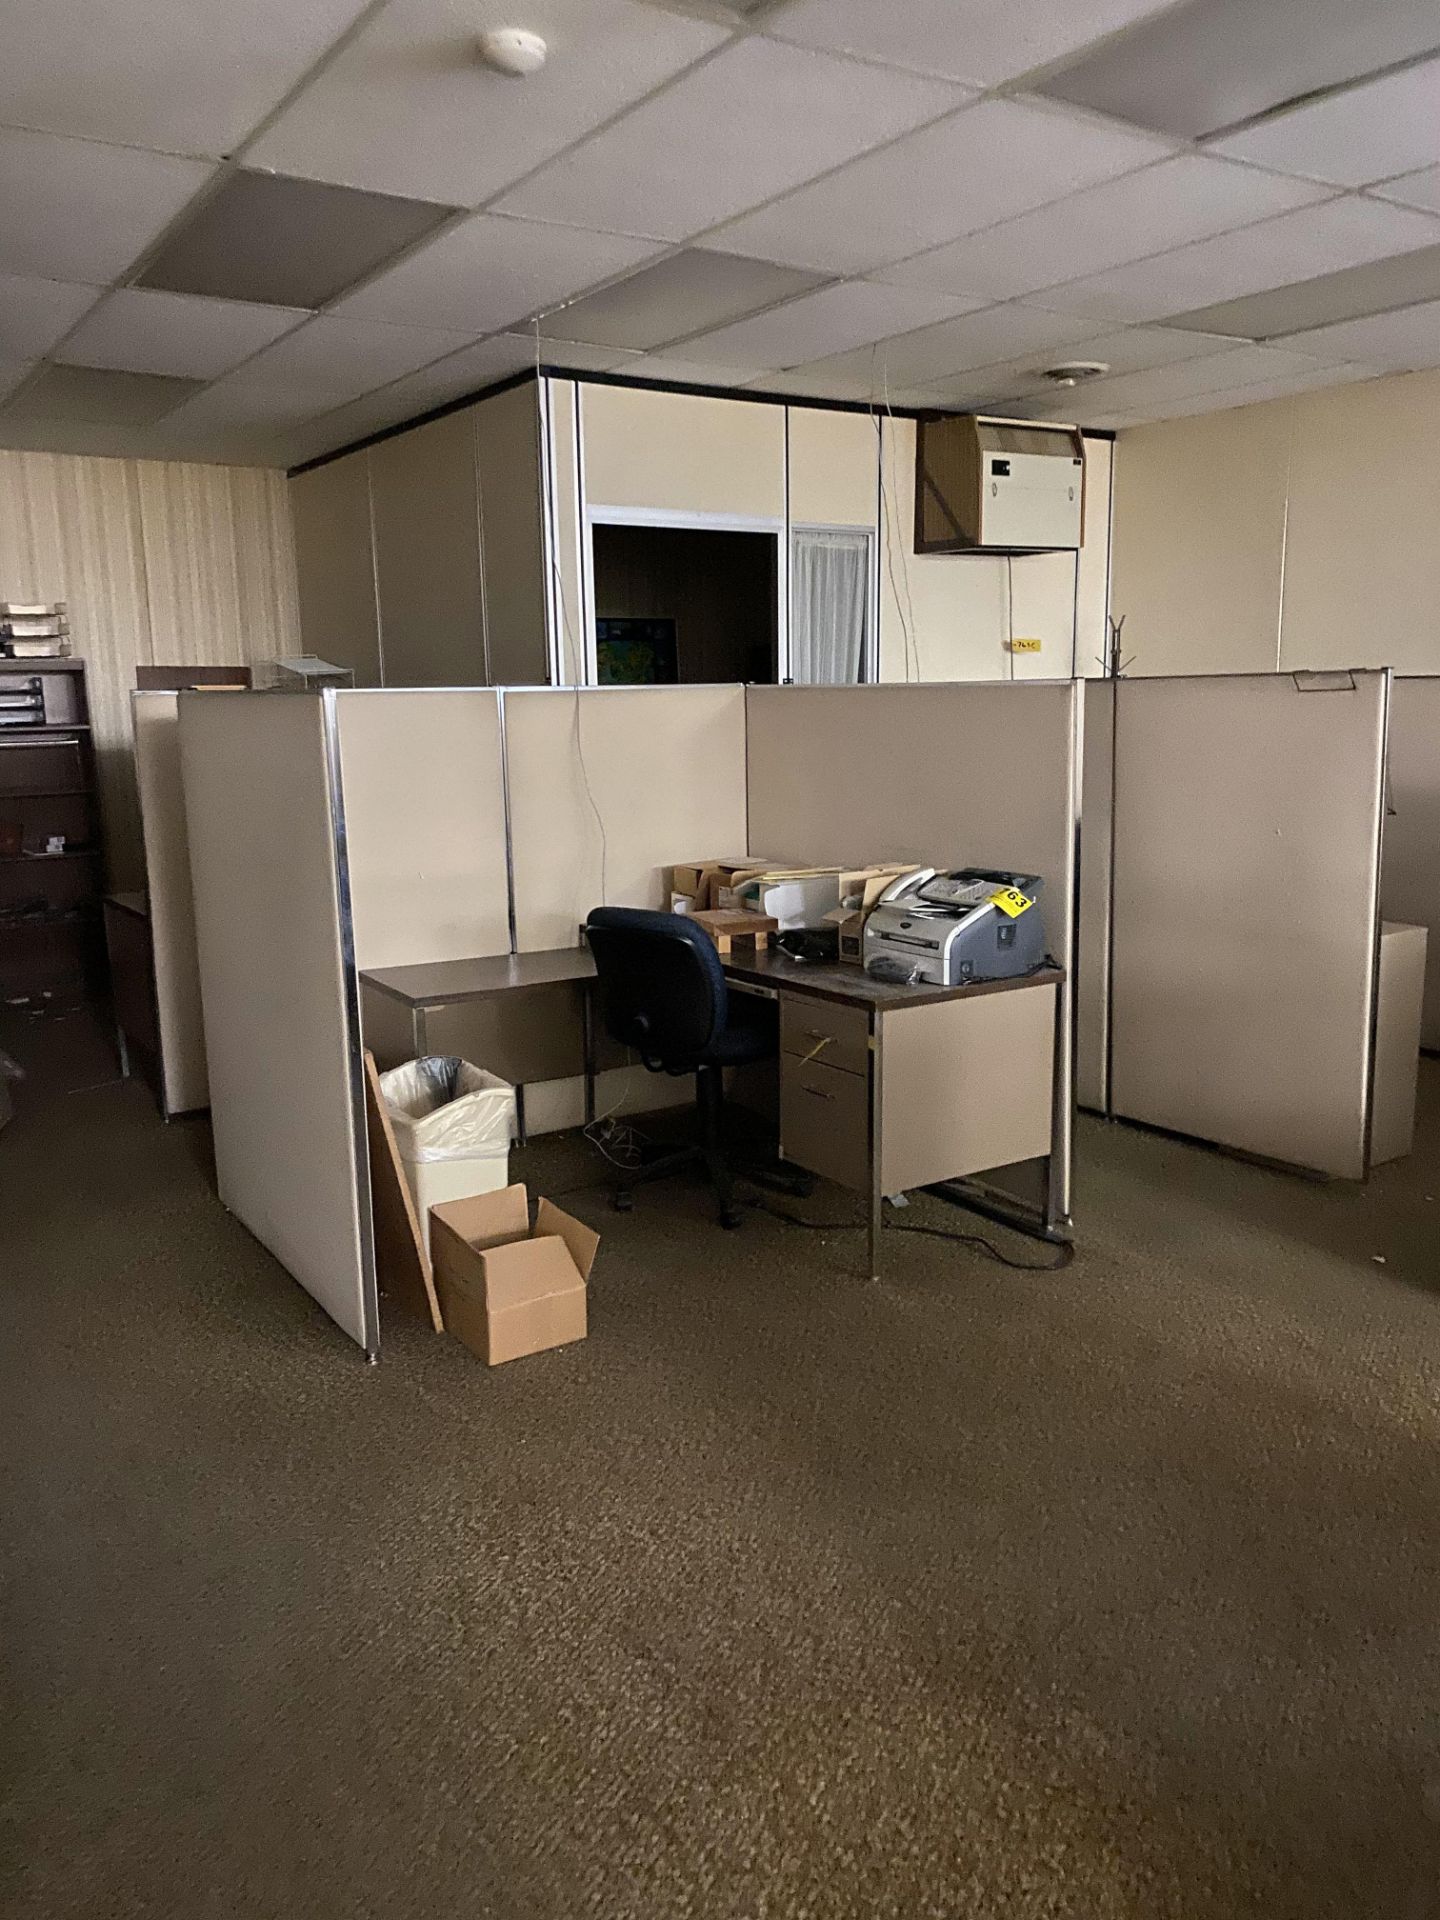 (14) OFFICE CUBICAL WALLS / DIVIDERS - Image 3 of 3